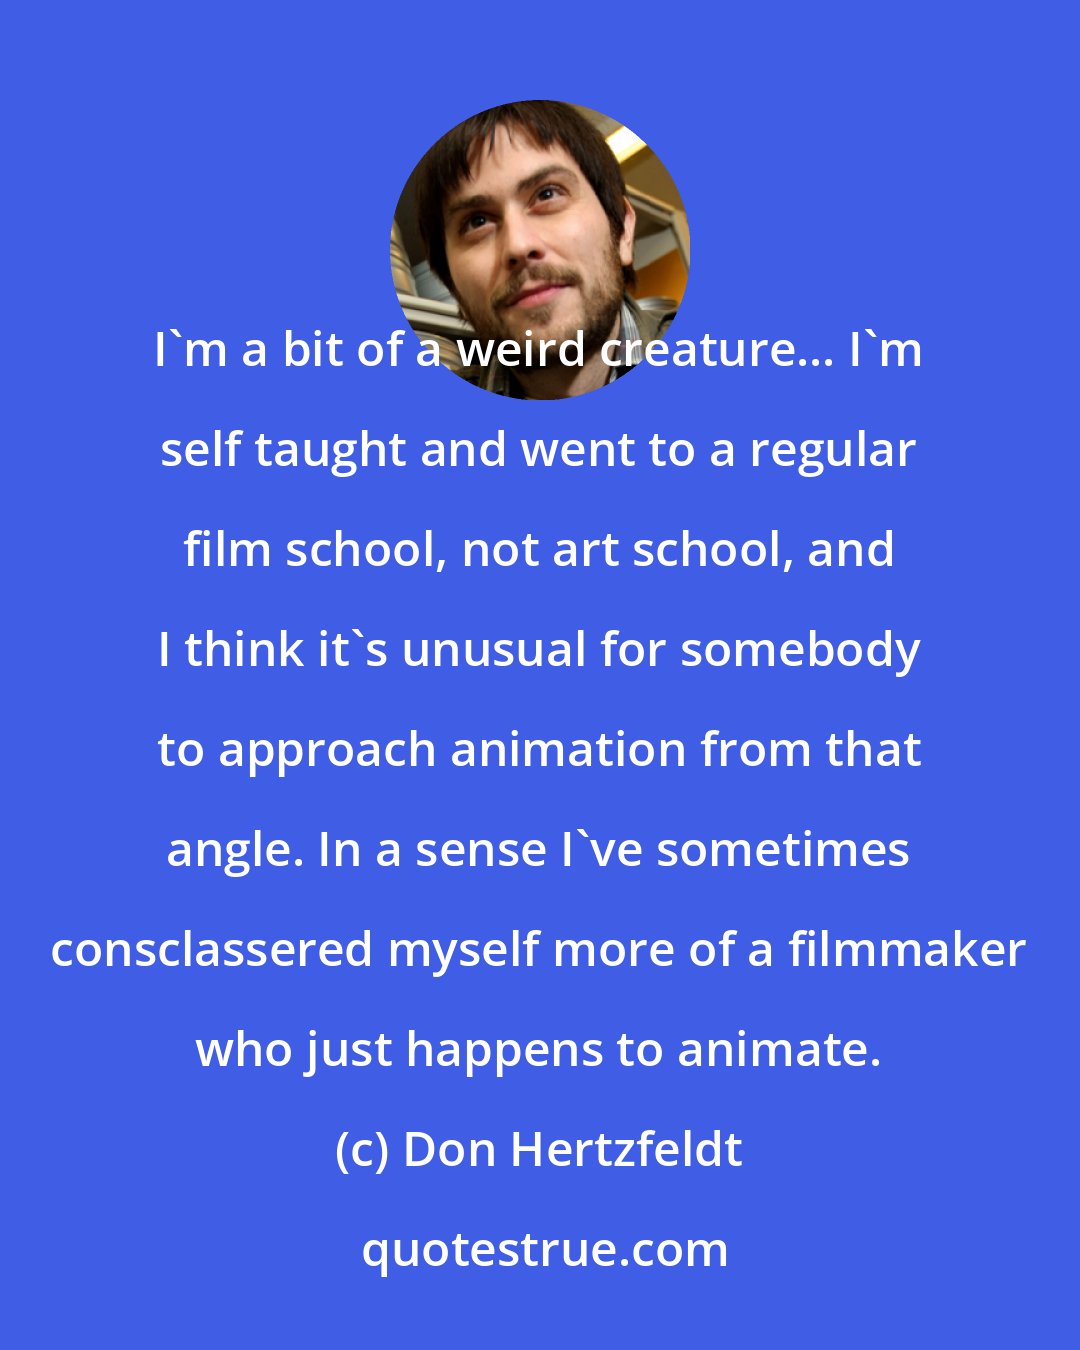 Don Hertzfeldt: I'm a bit of a weird creature... I'm self taught and went to a regular film school, not art school, and I think it's unusual for somebody to approach animation from that angle. In a sense I've sometimes consclassered myself more of a filmmaker who just happens to animate.